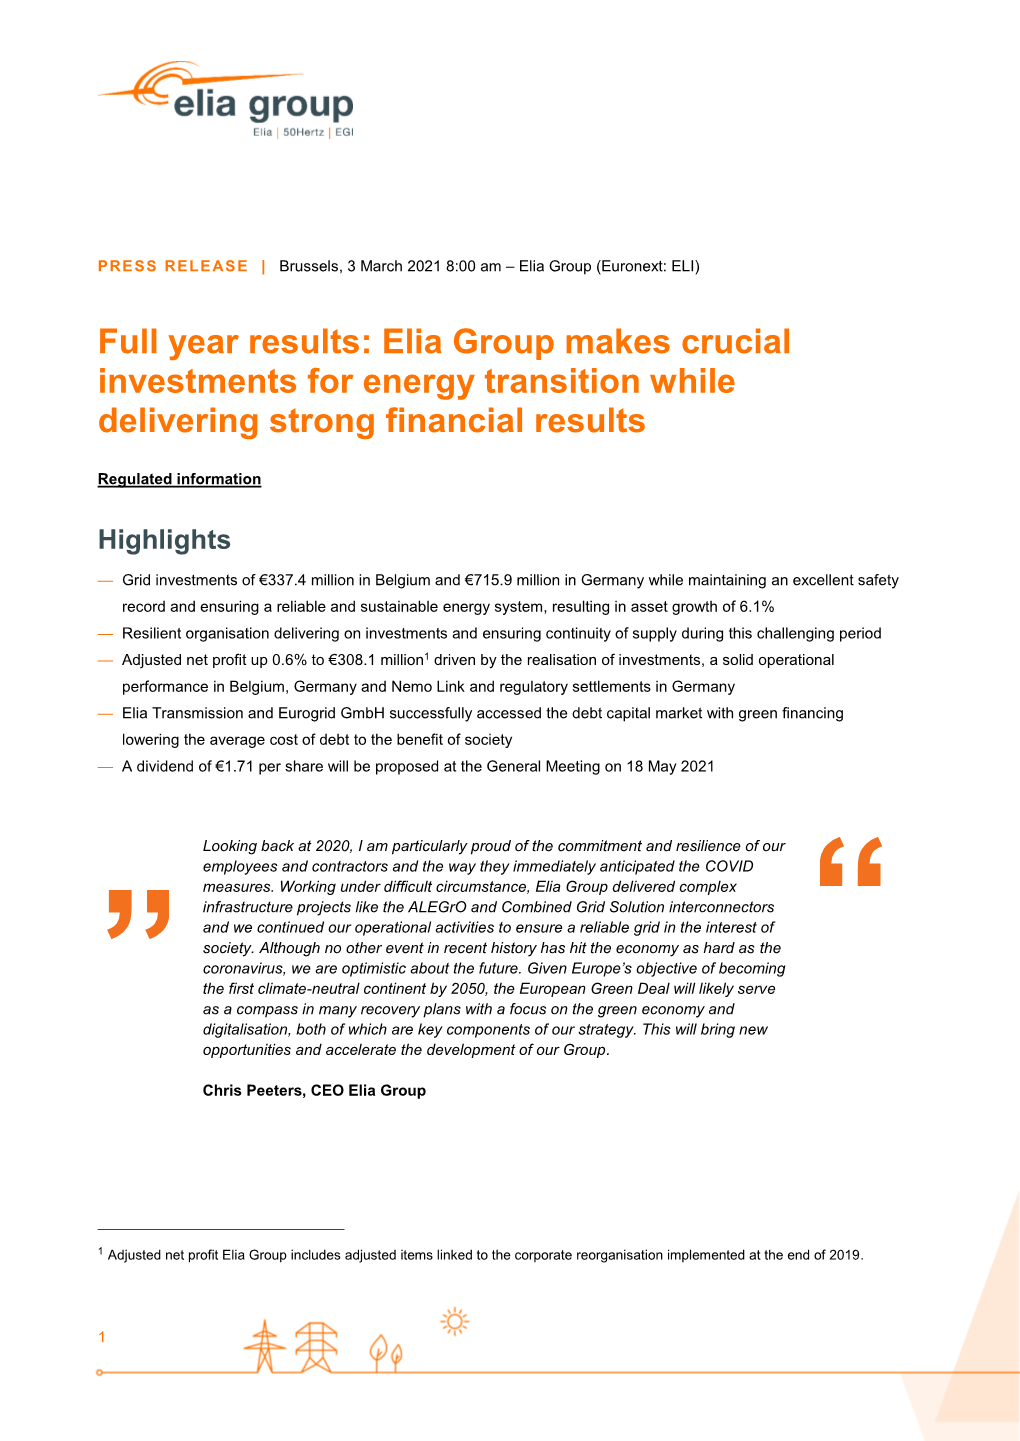 Full Year Results: Elia Group Makes Crucial Investments for Energy Transition While Delivering Strong Financial Results